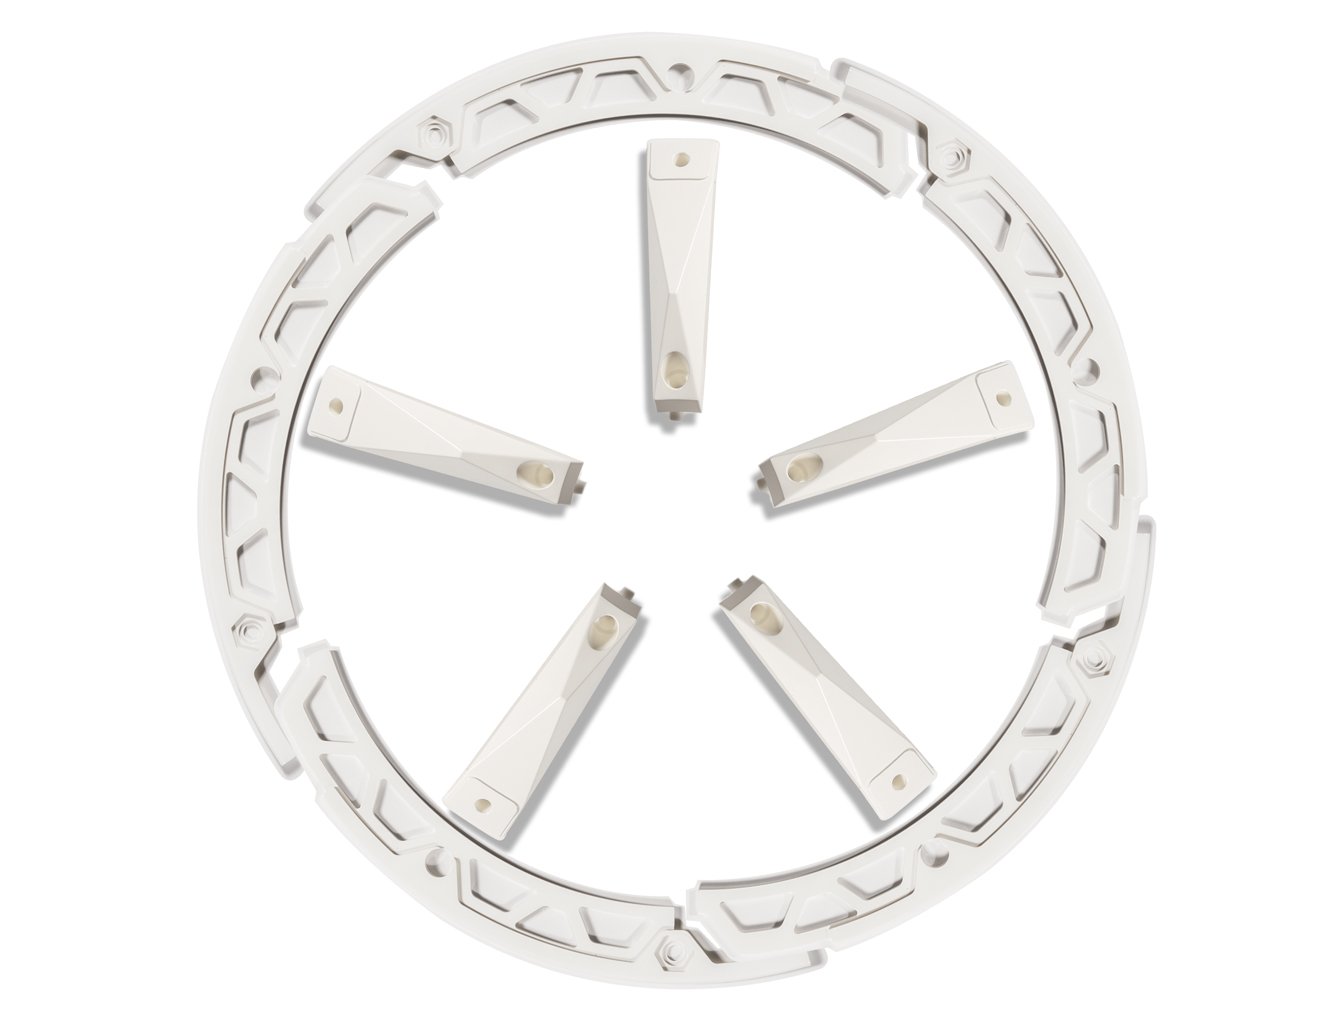 GD04A-Series Wheel Insert, Fits Wheel Size: 18 x 9 in., Direction: Non-Directional [White]